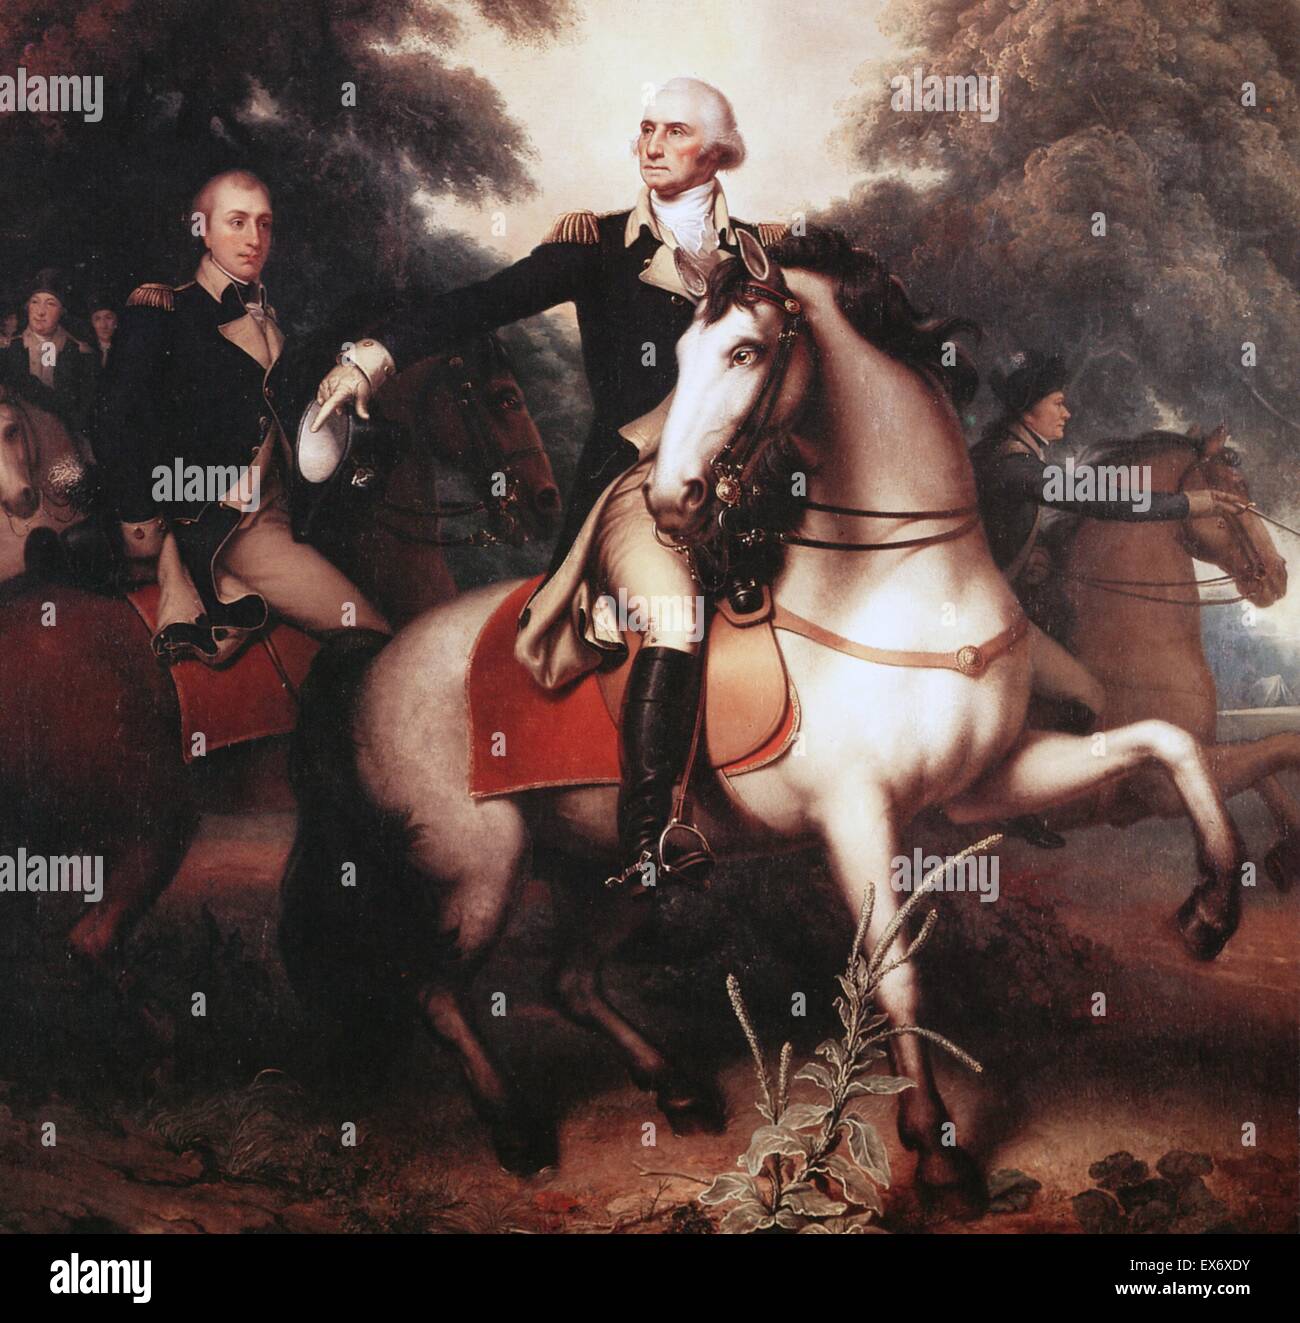 Washington before Yorktown by Rembrandt Peale (1778-1860). The picture shows George Washington, full-length portrait, in full dress uniform on horseback preparing his troops for the final battle of the Revolutionary War in Yorktown, Virginia. The figure t Stock Photo